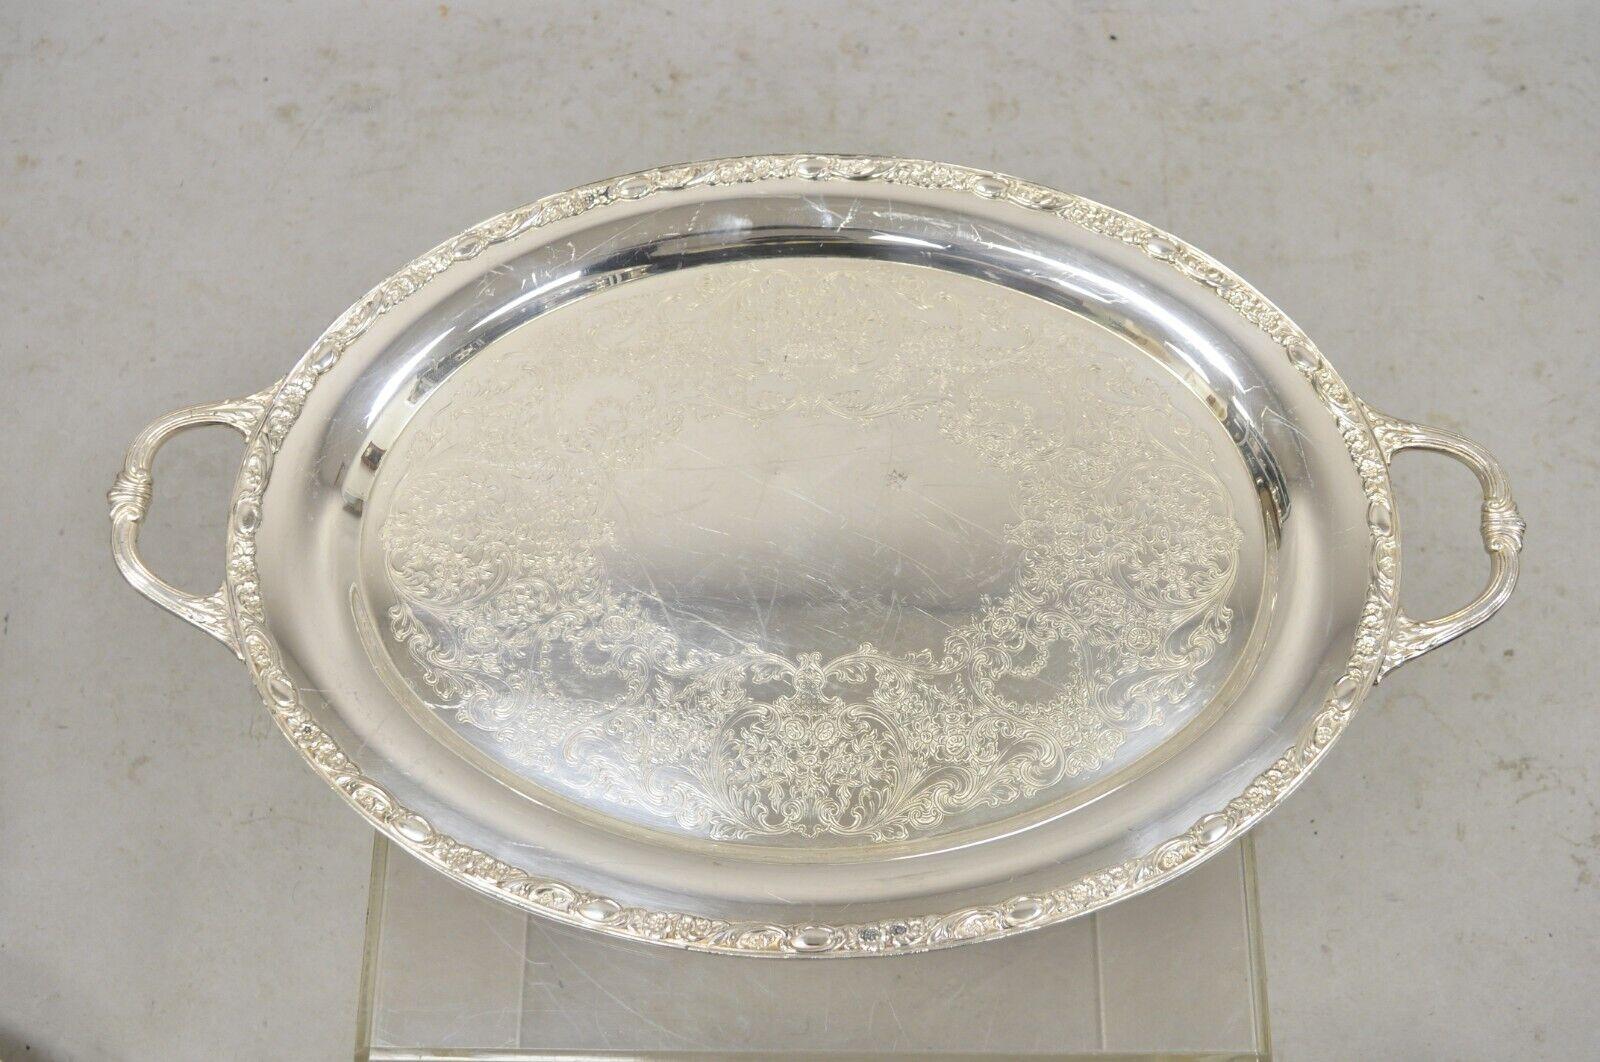 WM Rogers & Son Victorian Rose 1982 Silver Plated Oval Serving Platter Tray. Circa Late 20th Century. Measurements: 1.5